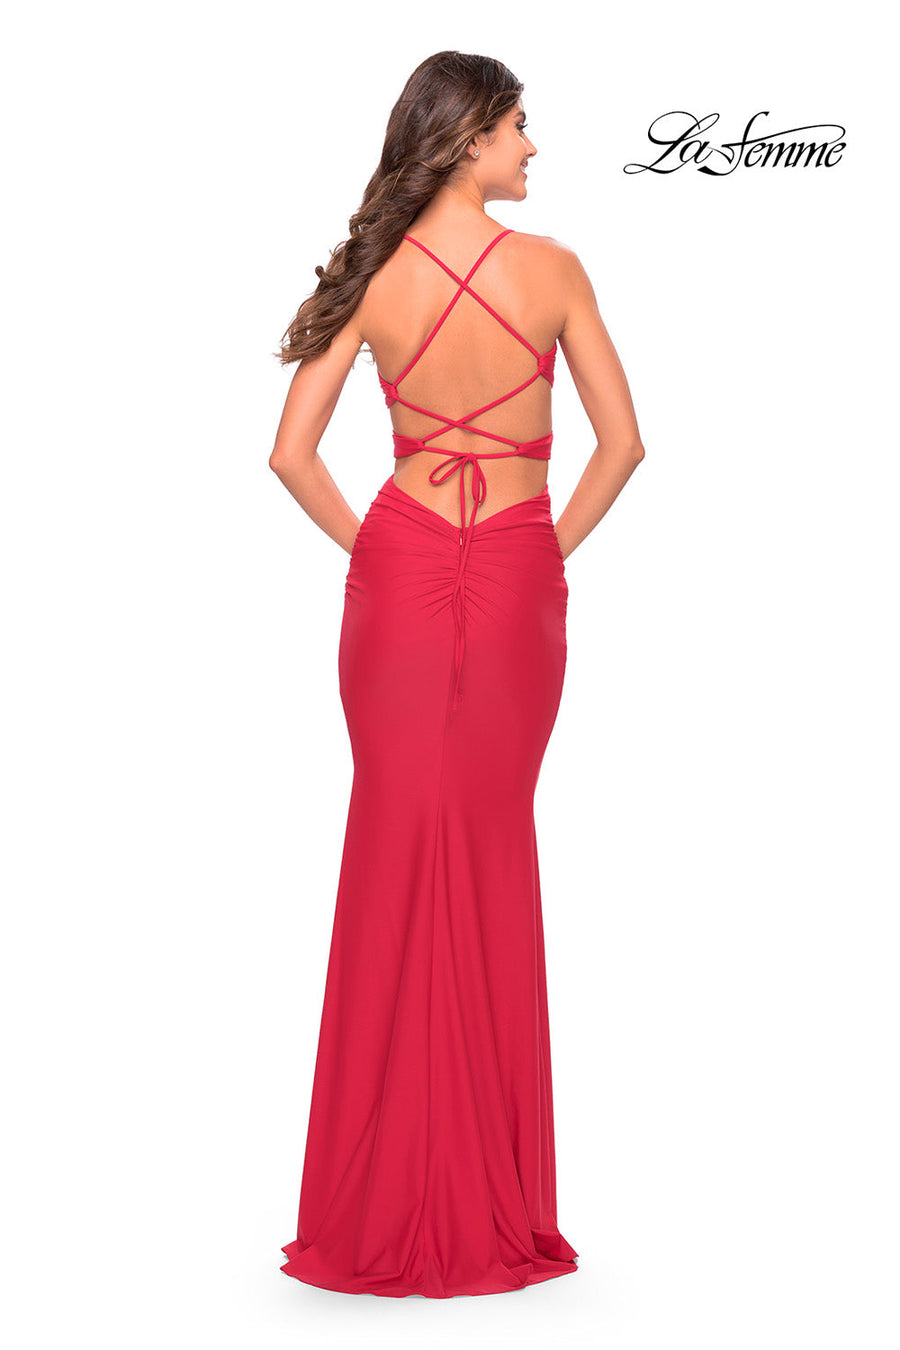 La Femme 31523 prom dress images.  La Femme 31523 is available in these colors: Black, Red, Royal Blue.